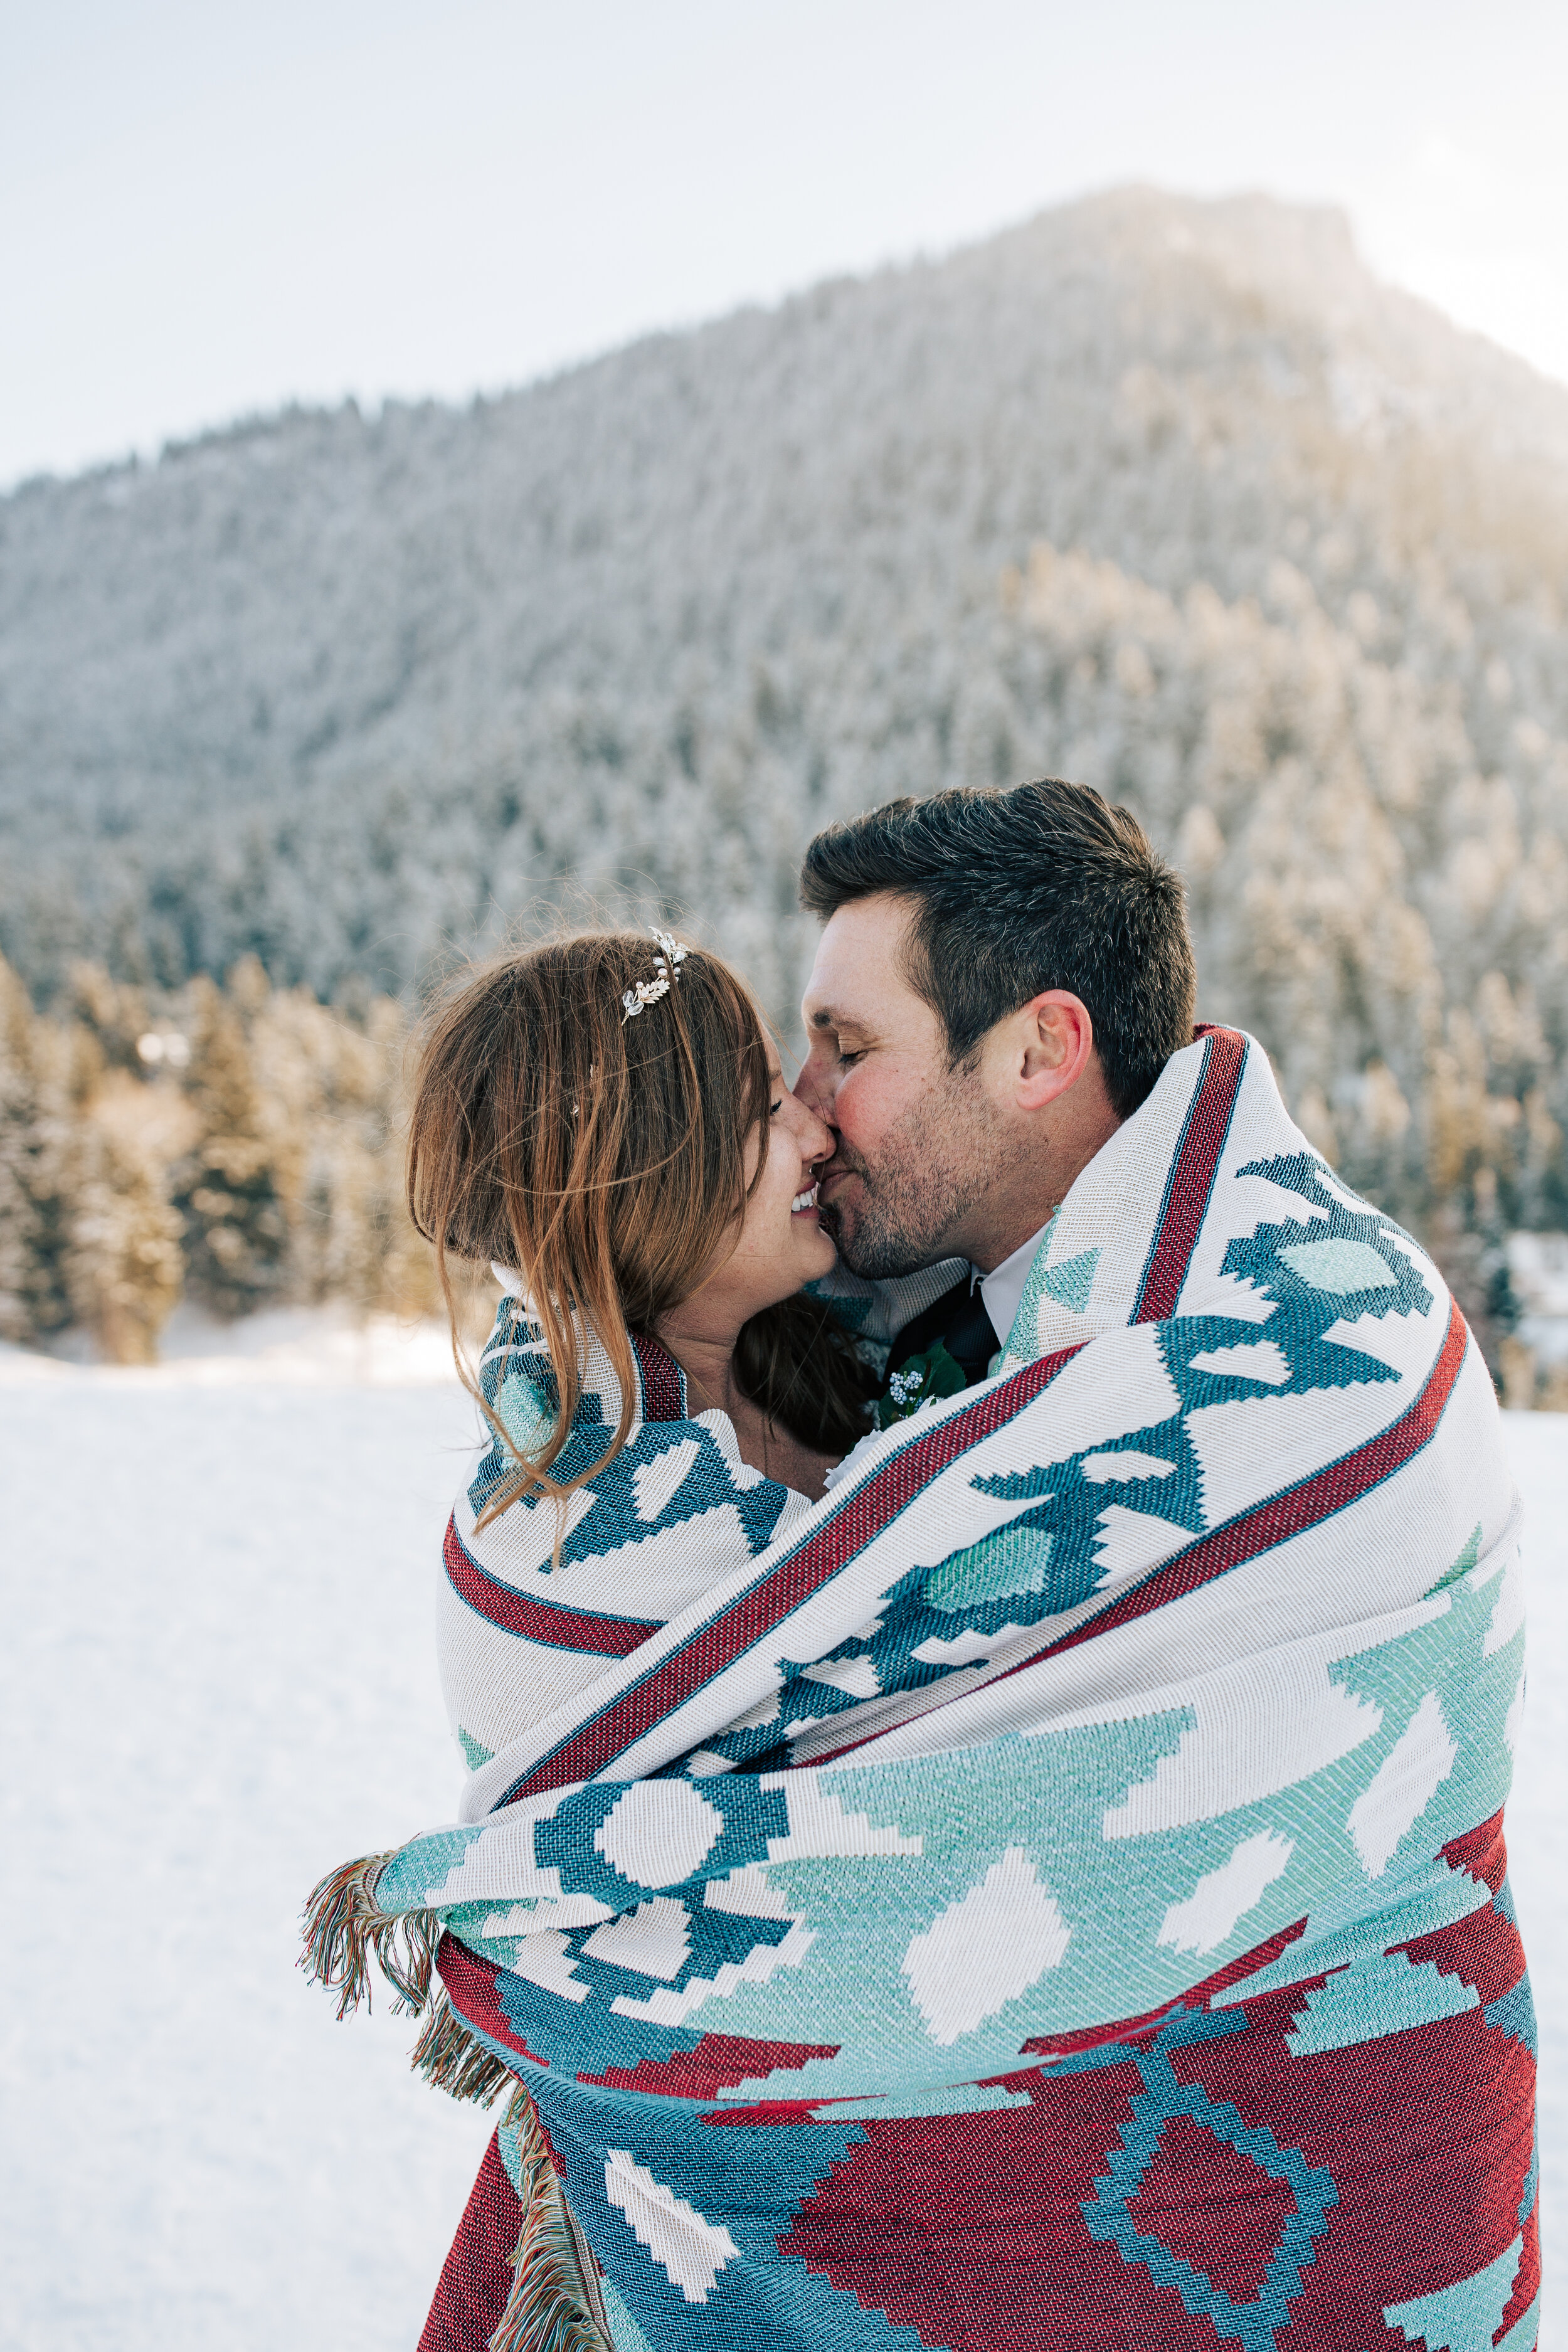  Darling couple snuggle and kiss in a boho blanket in a snowy mountain location captured by West Coast Elopement Photographer Emily Jenkins Photography. kissing while snuggling in a blanket in the snow mountain snow scene bridal pictures #emilyjenkin